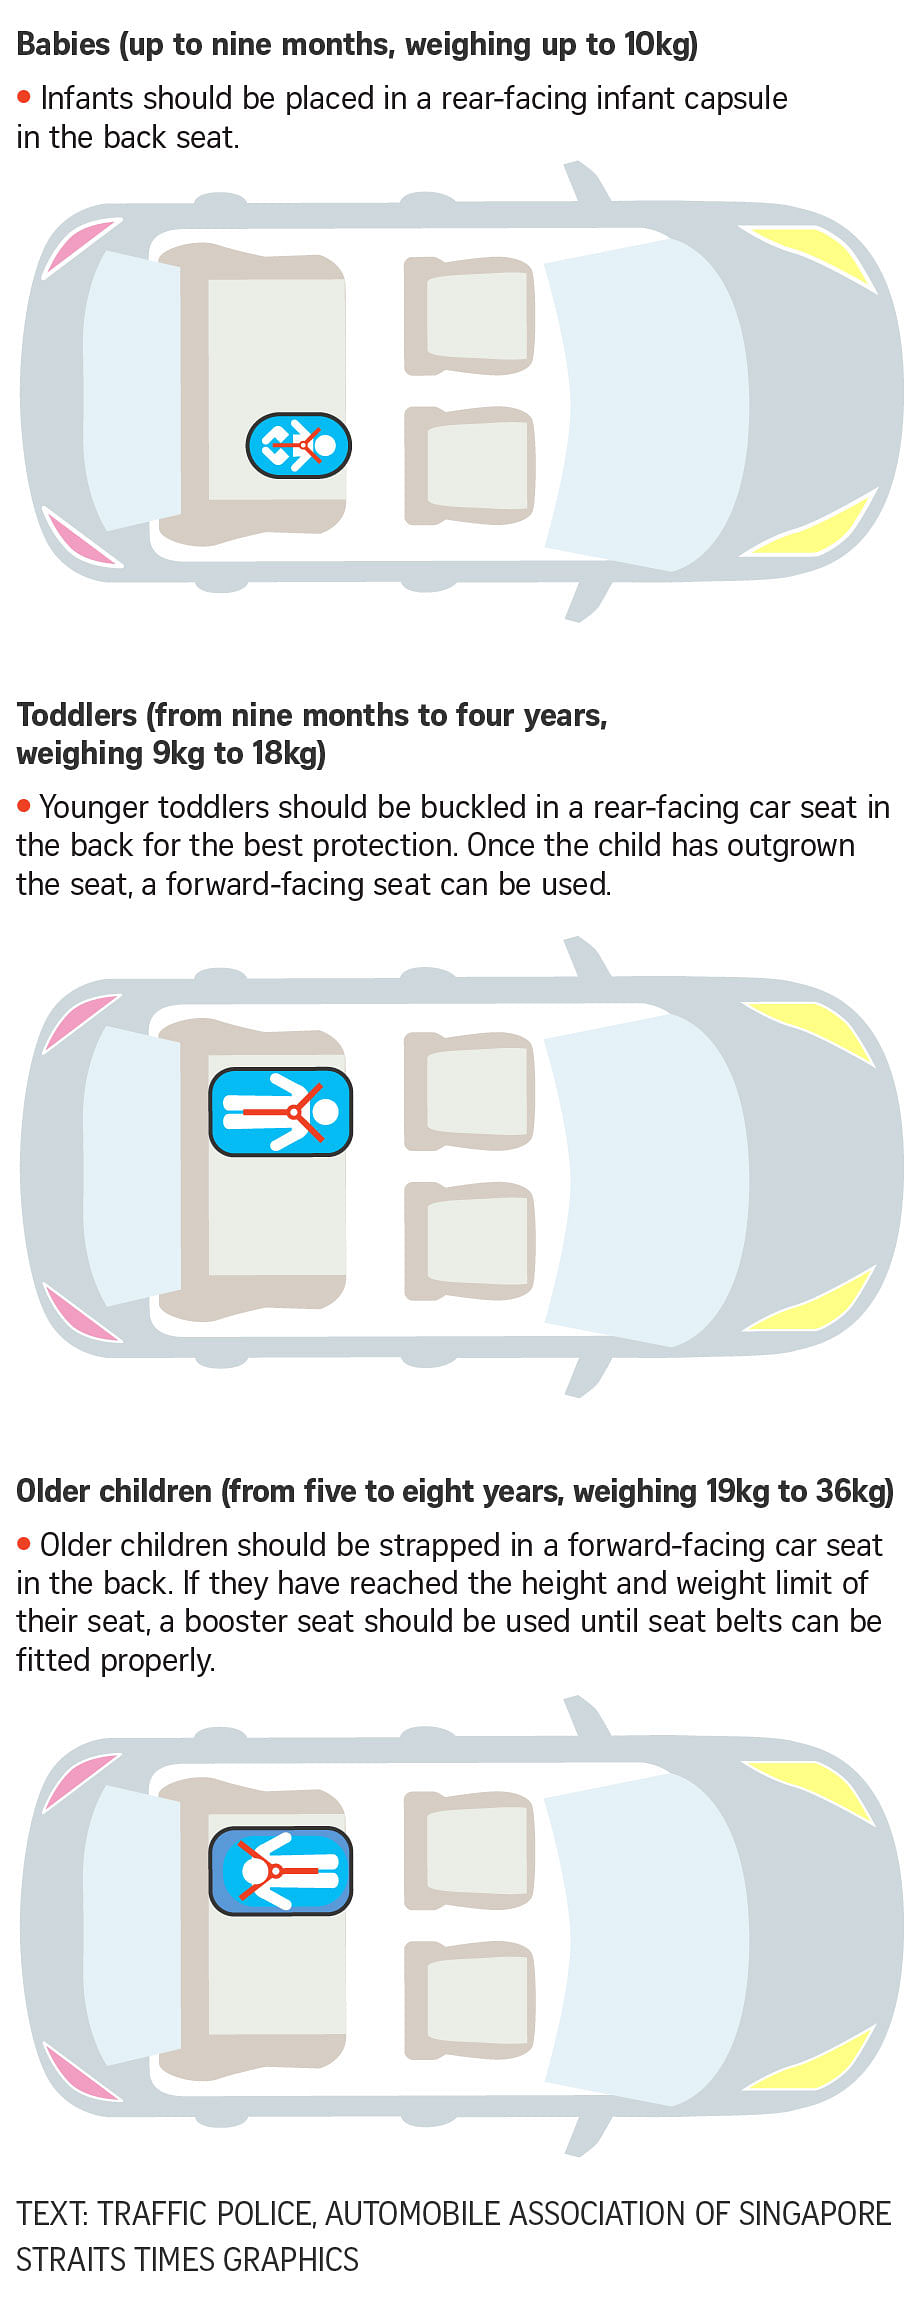 Children on board: 5 safety tips for parents travelling with kids